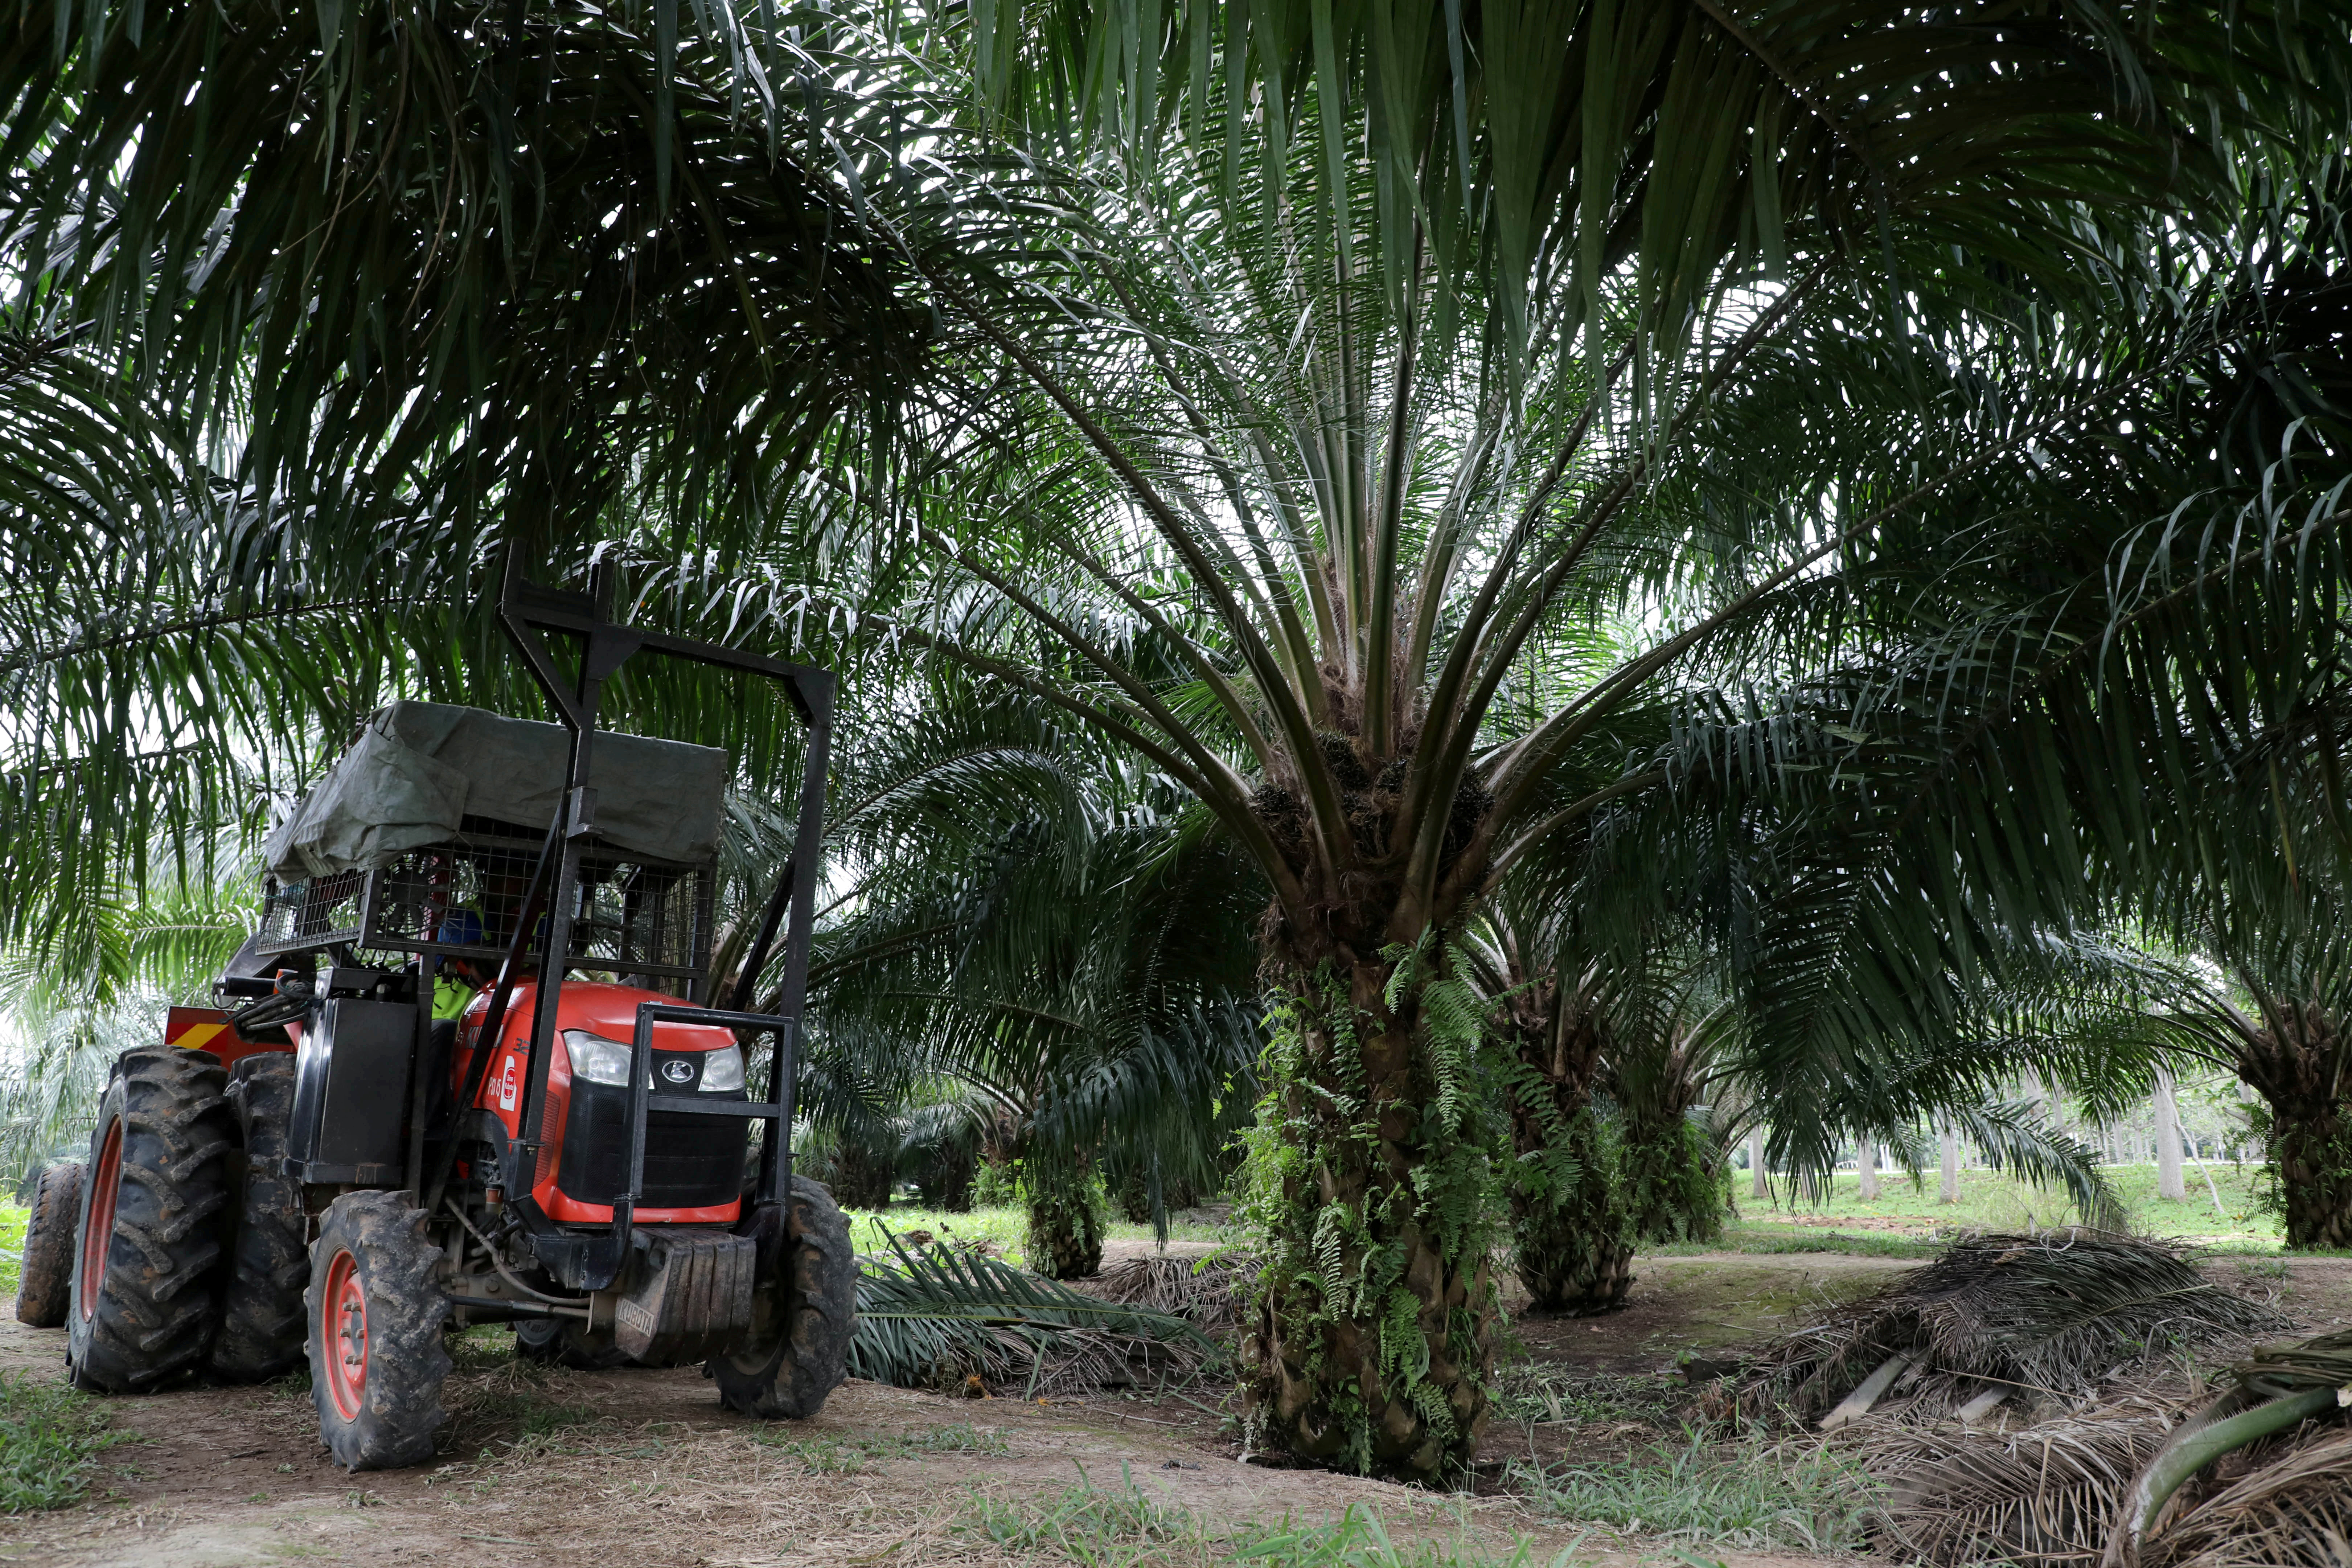 A mini tractor grabber collects palm oil fruits at a plantation in Pulau Carey